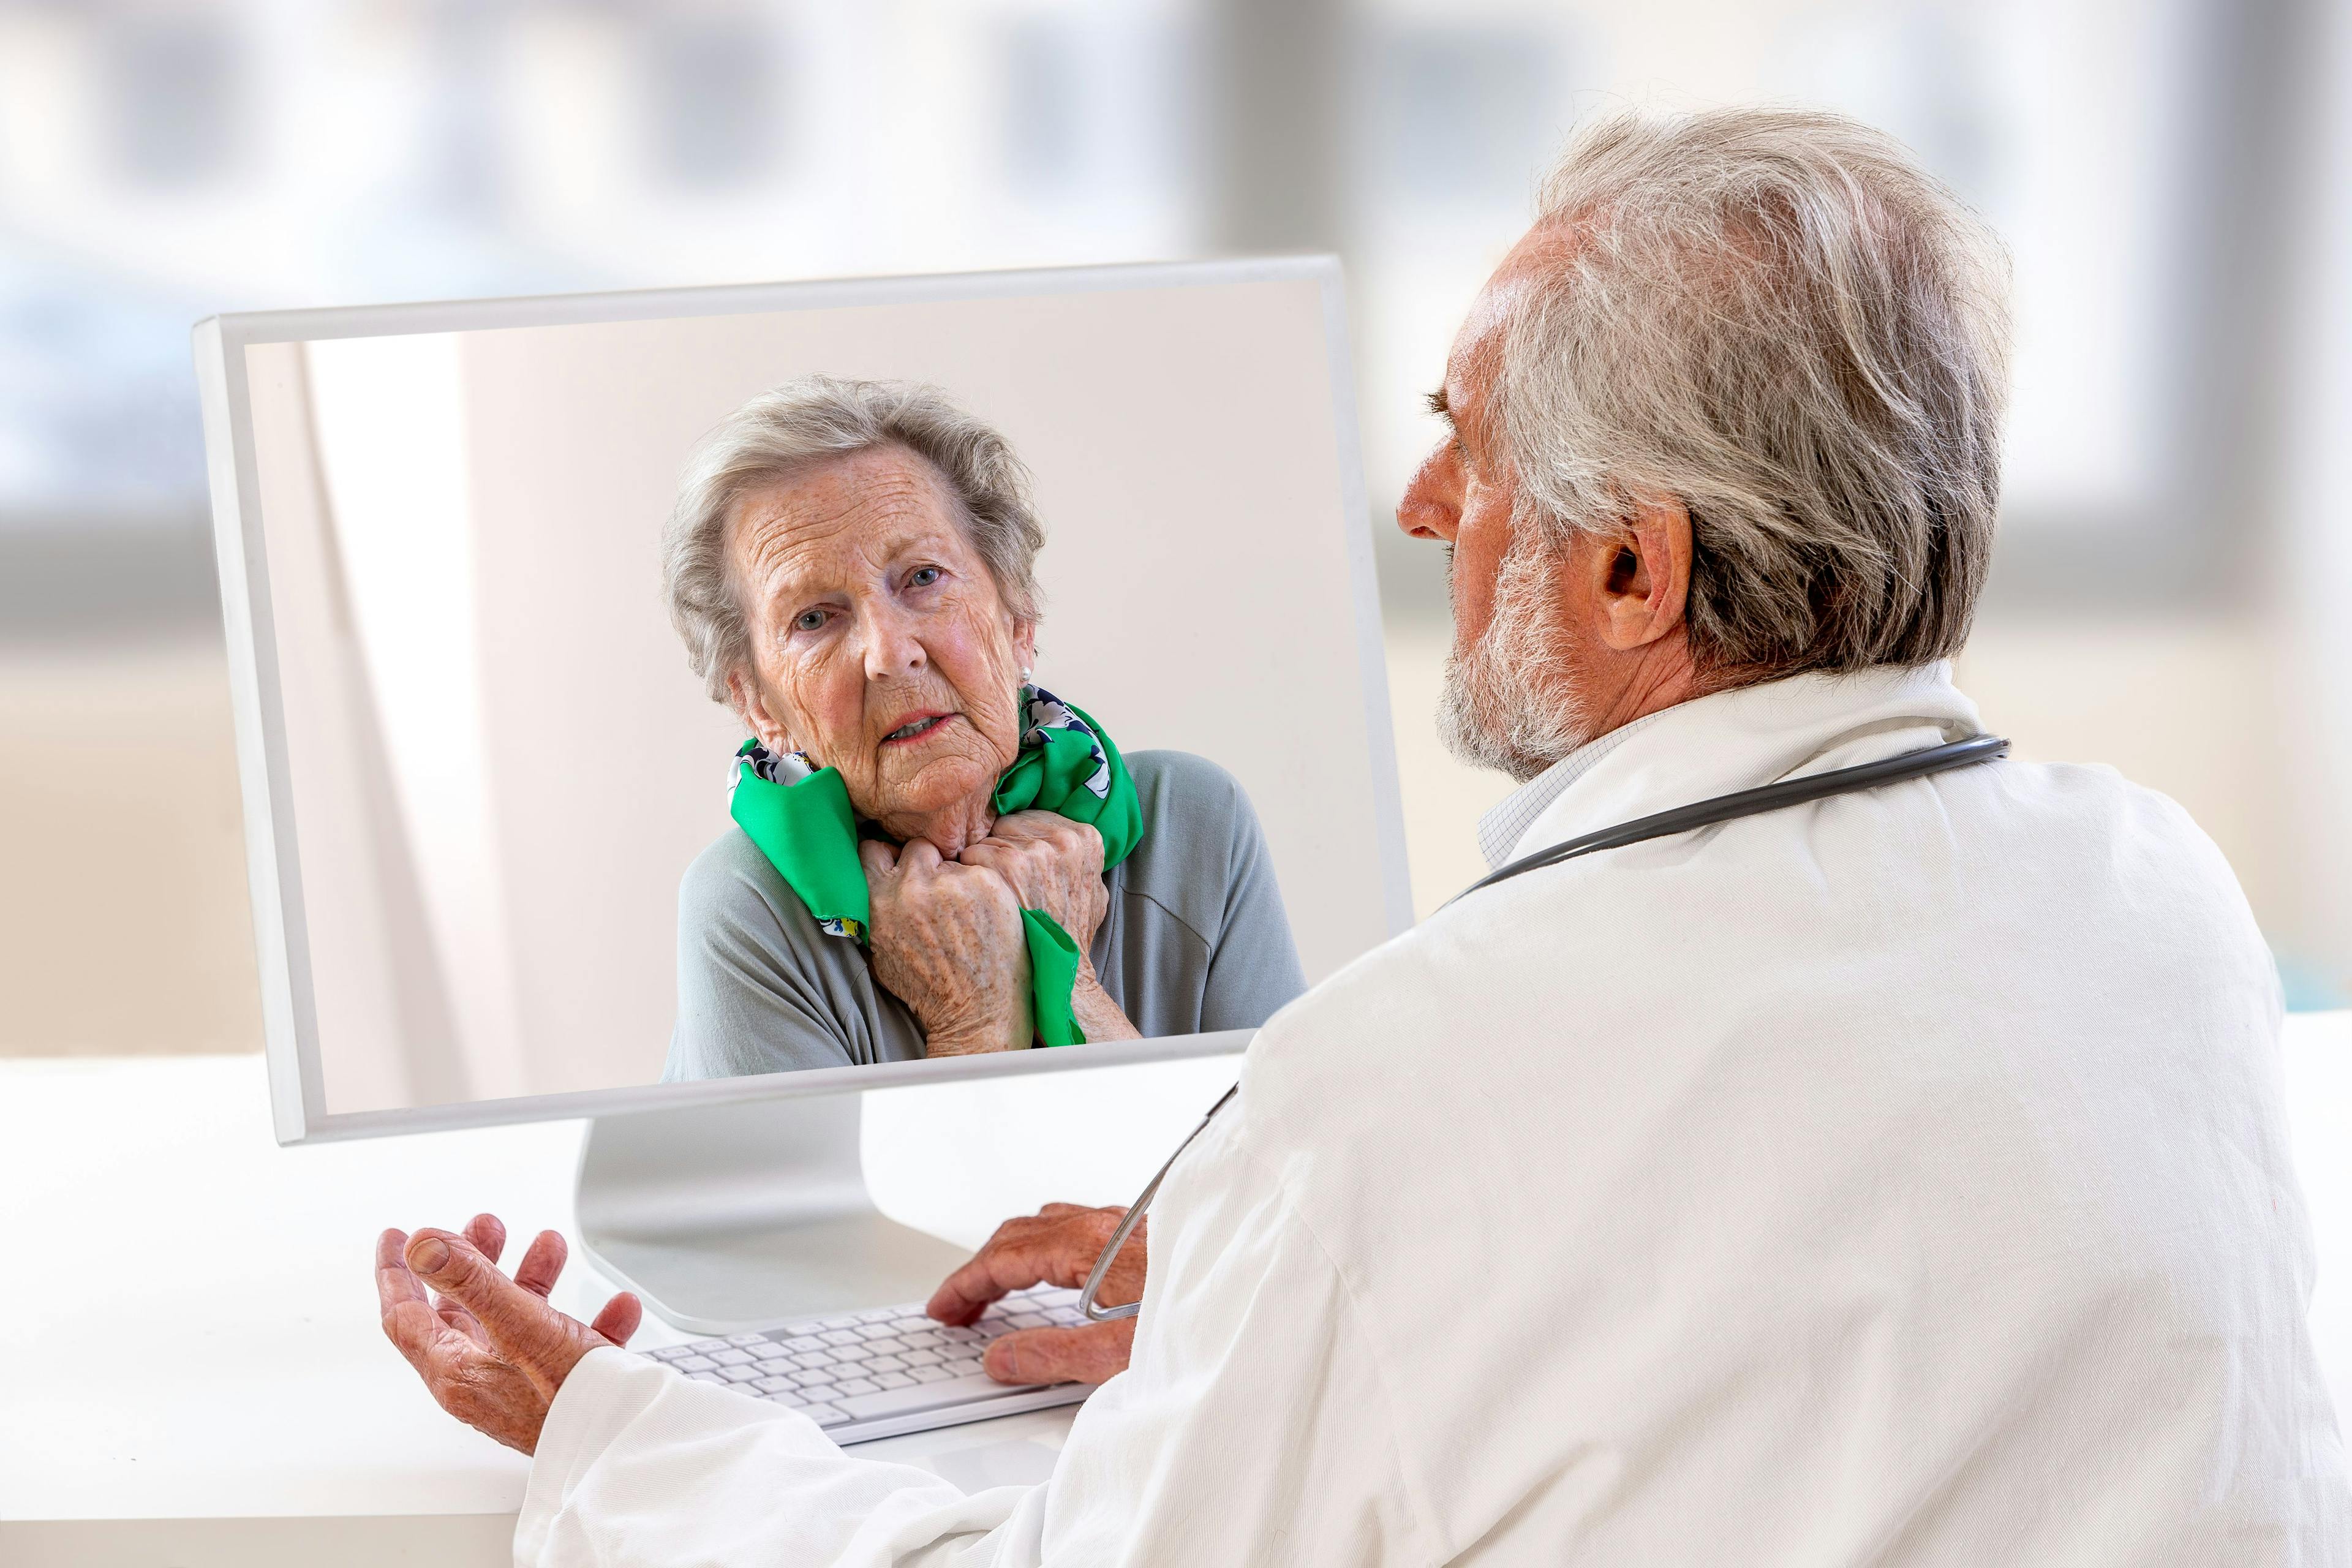 Making telehealth work for senior patients